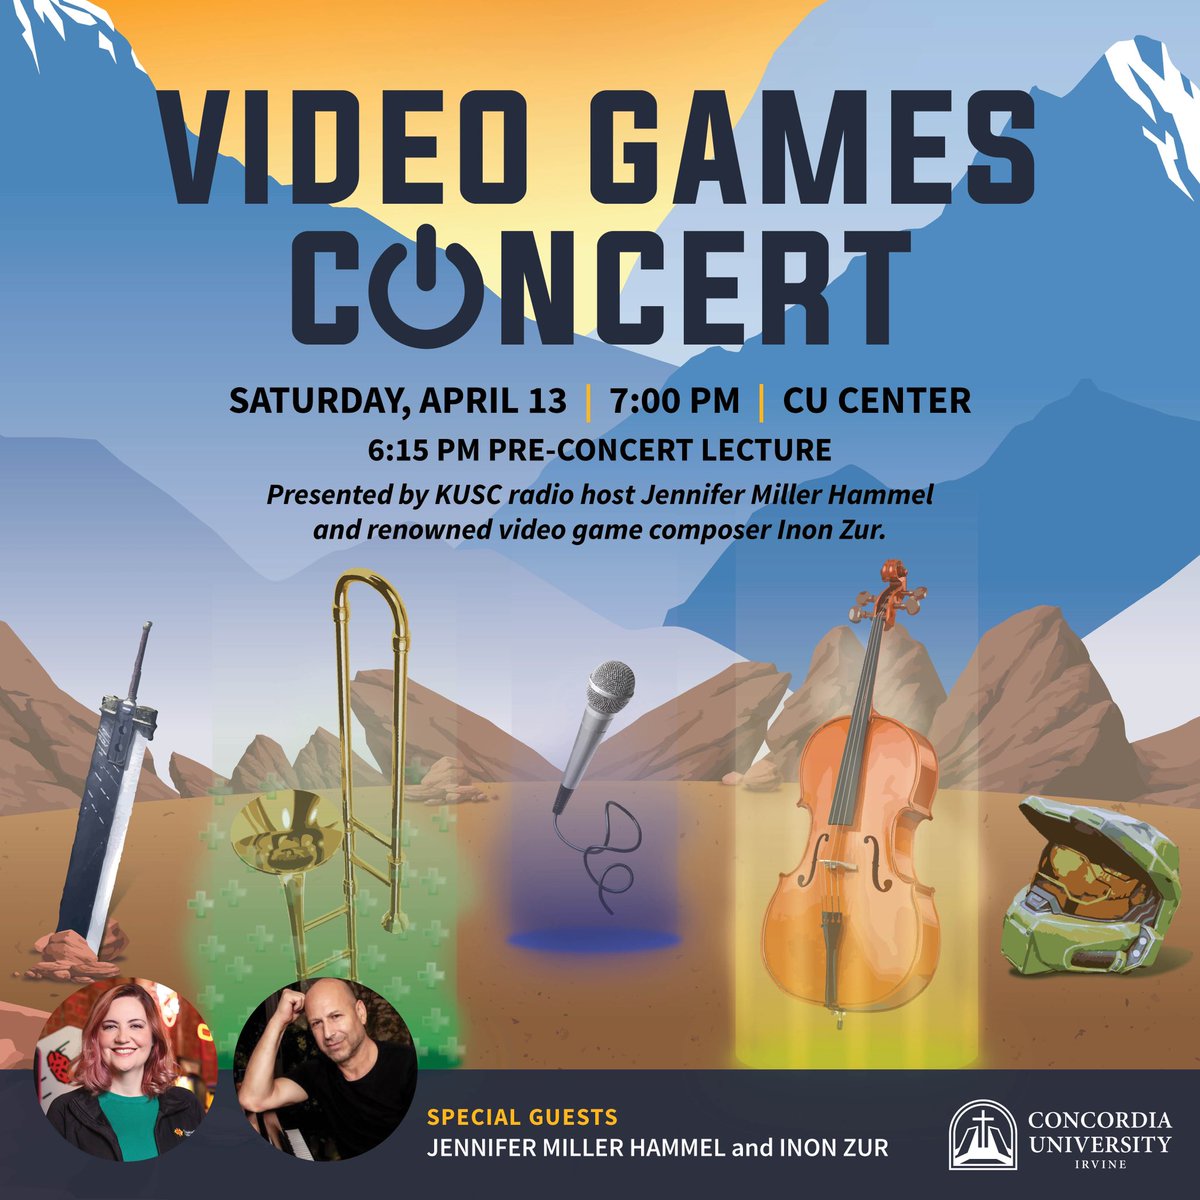 Dear Friends, If you are in the Irvine area this Saturday I hope you can join us and the @ConcordiaIrvine Symphony for a special performance of @StarfieldGame - and other titles like Halo and Final Fantasy - narrated by @JenMillerRadio. Also, arrive early for the pre-show Q&A!